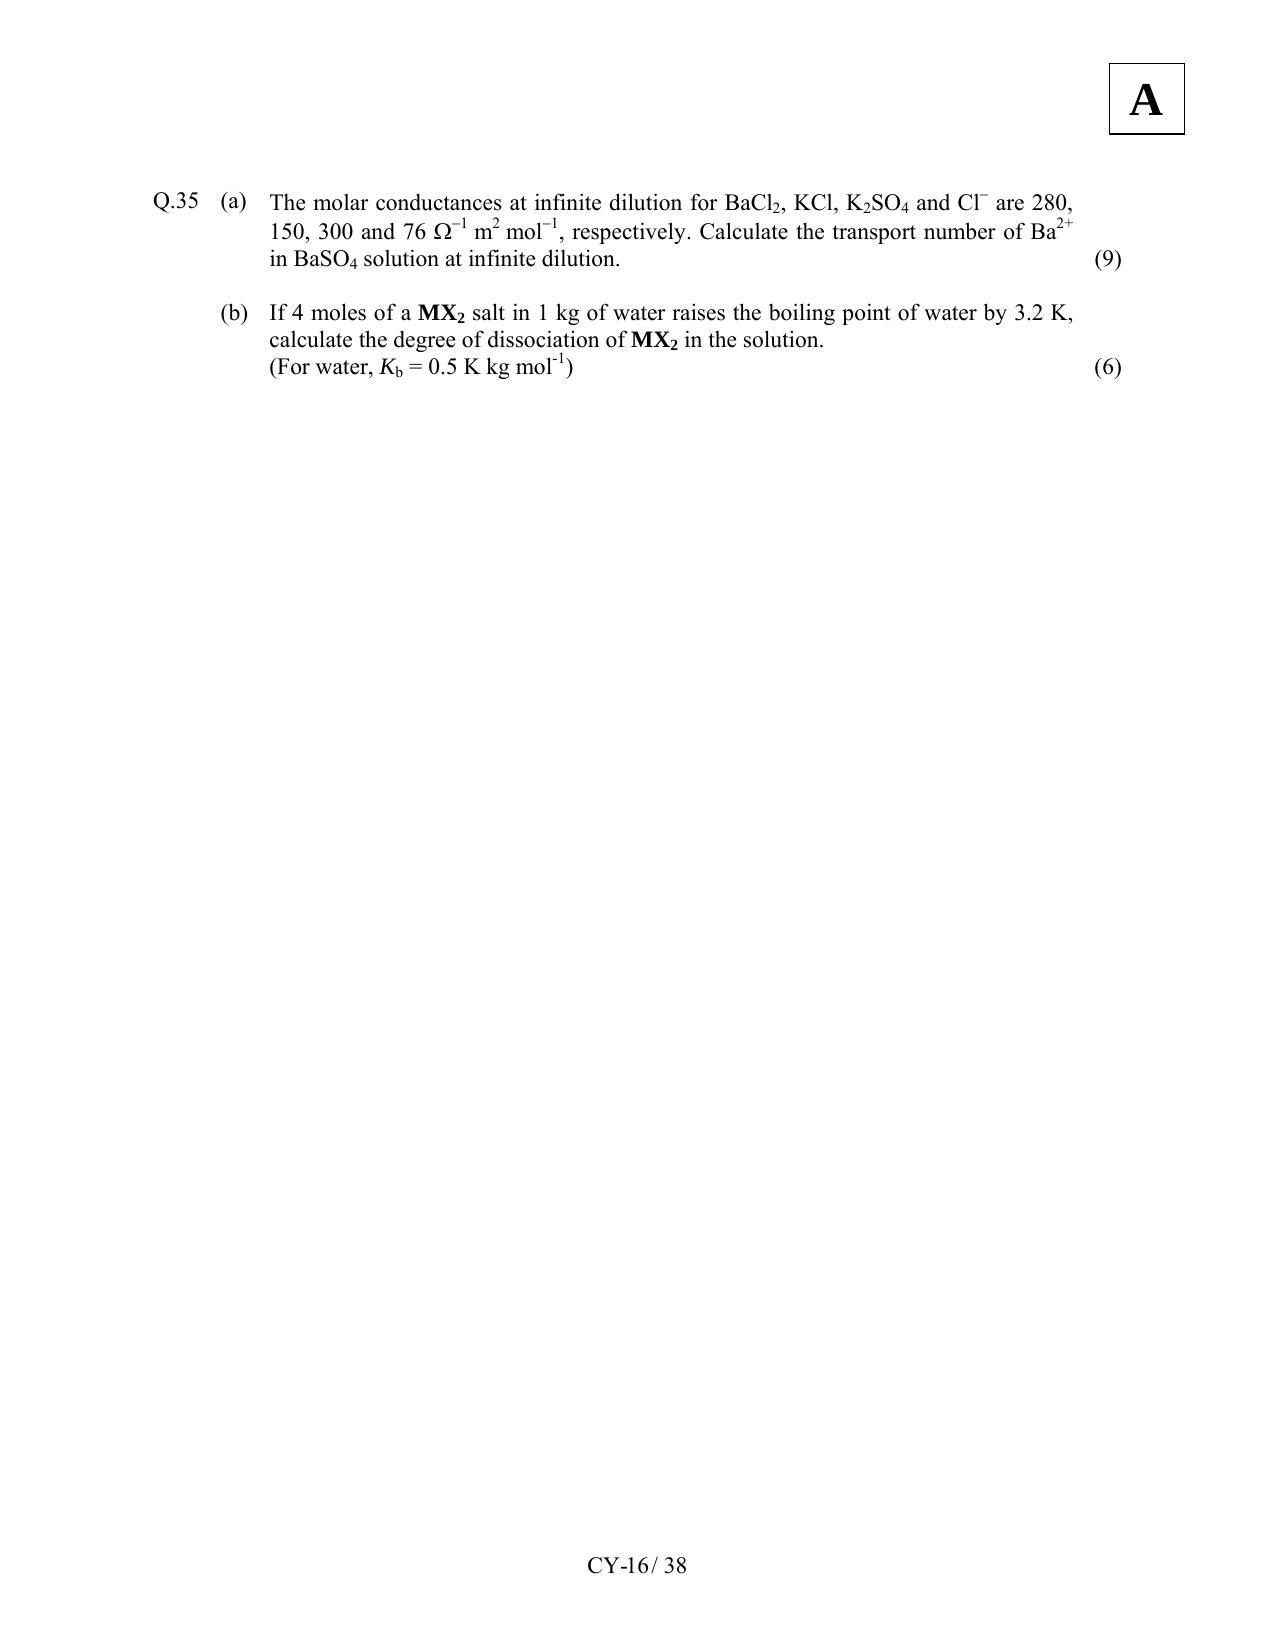 JAM 2011: CY Question Paper - Page 18